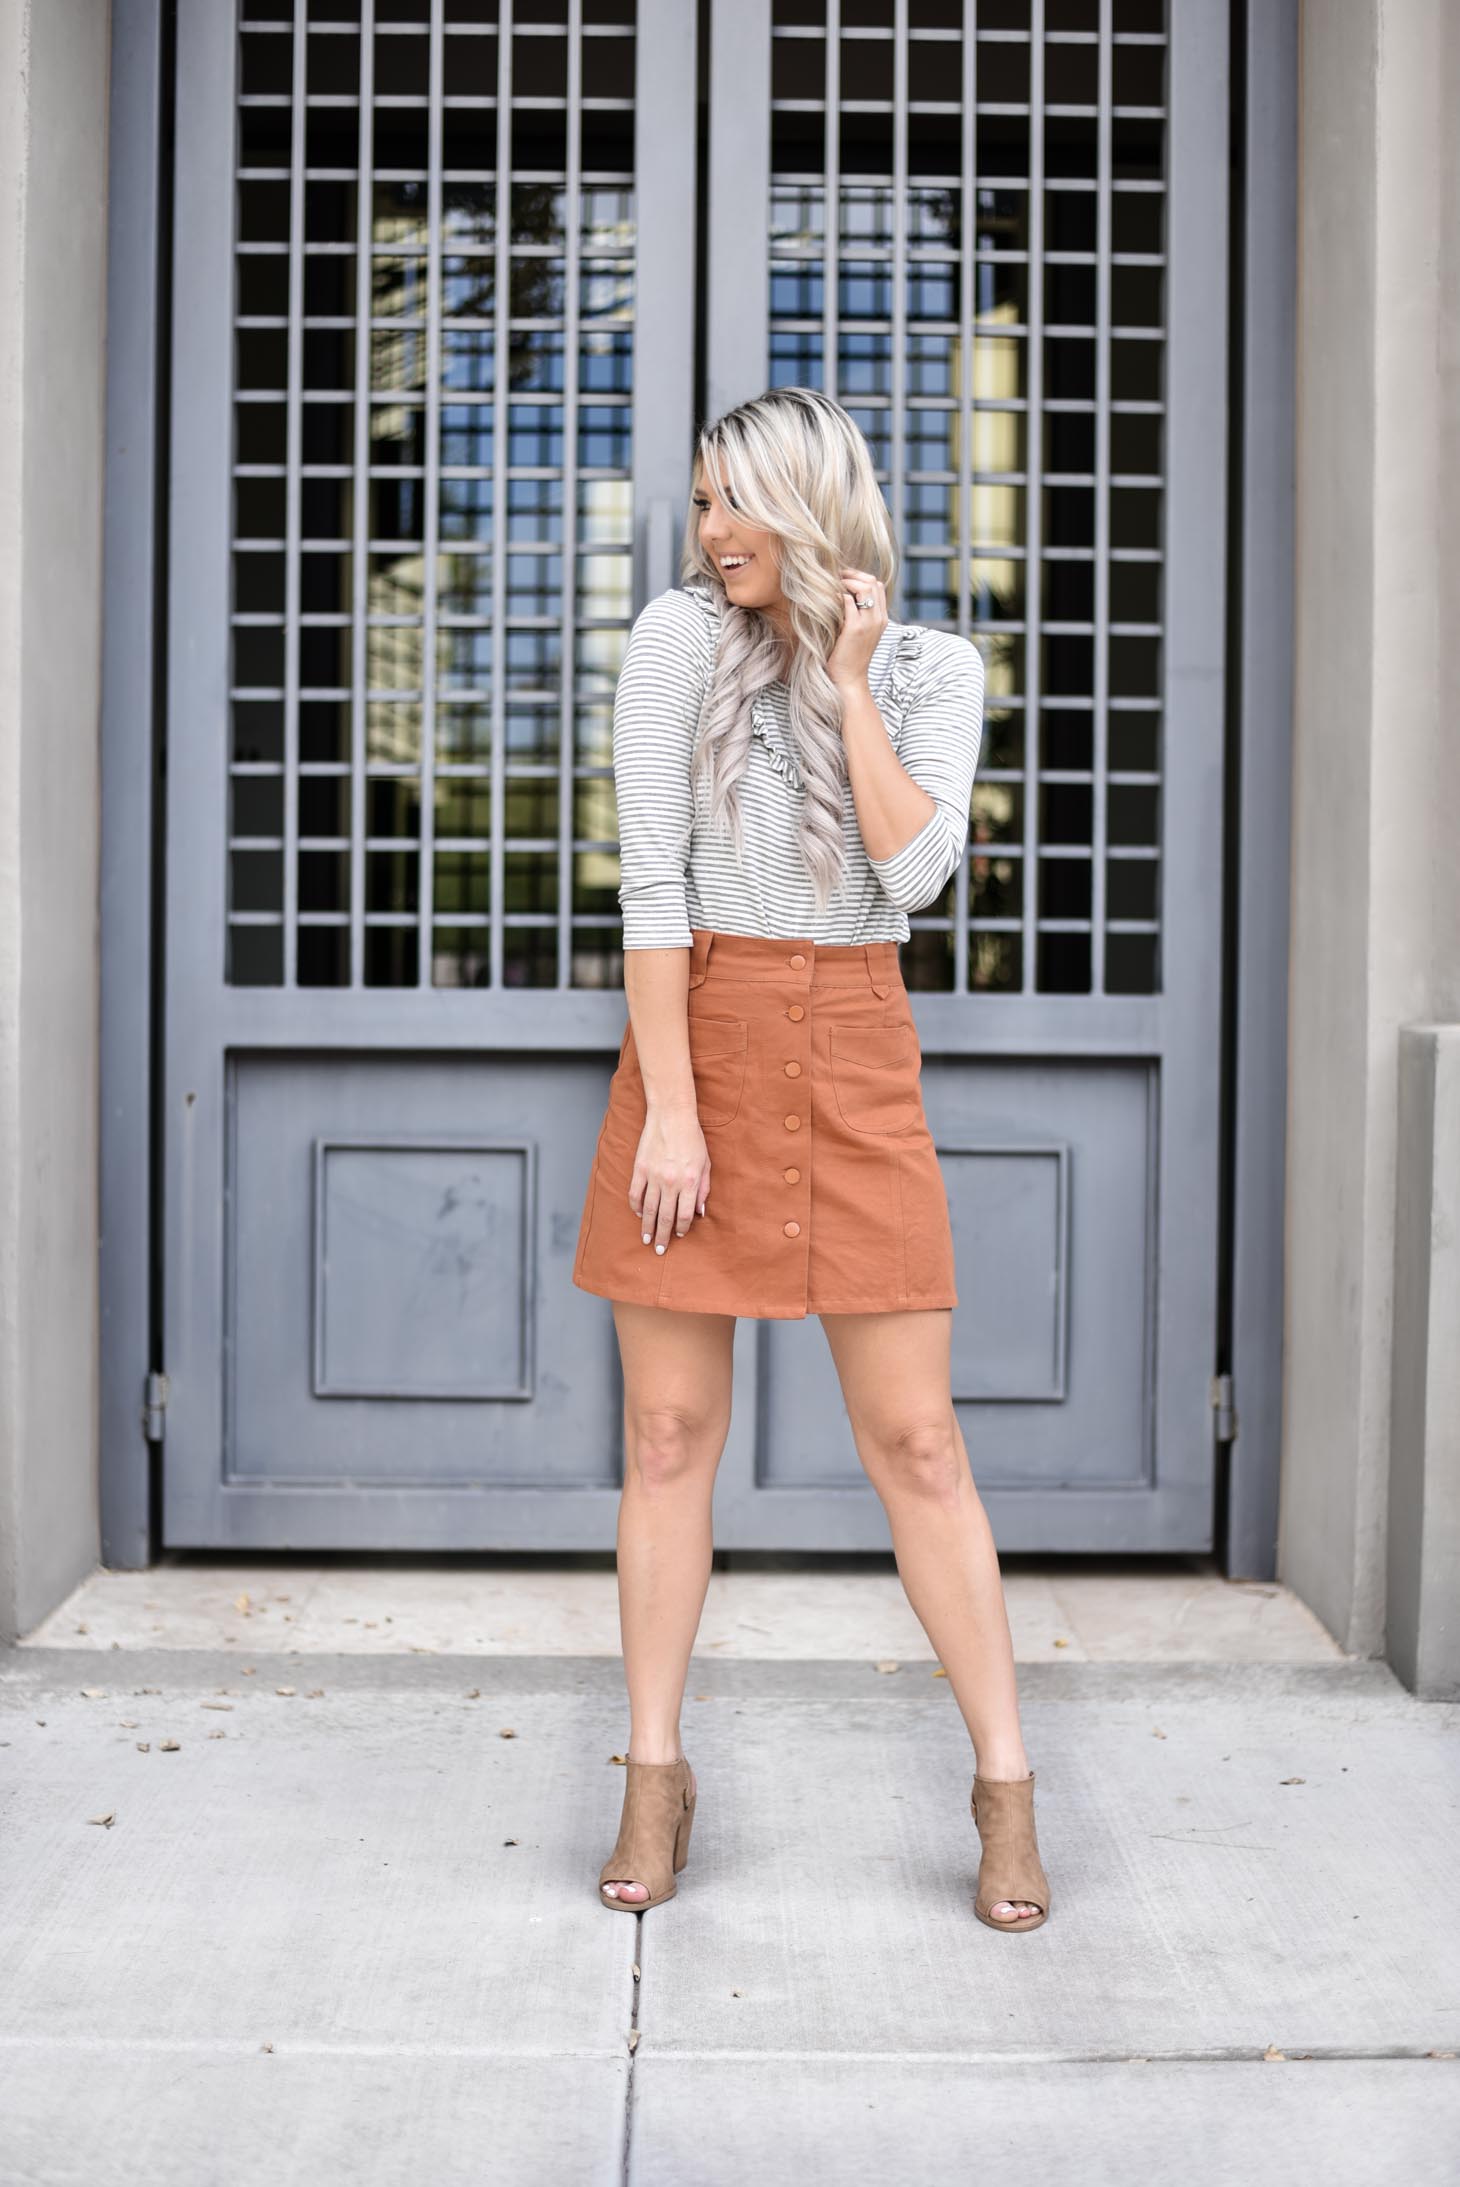 Erin Elizabeth of Wink and a Twirl shares two ways to style a Pink Lily Boutique striped top from day to night